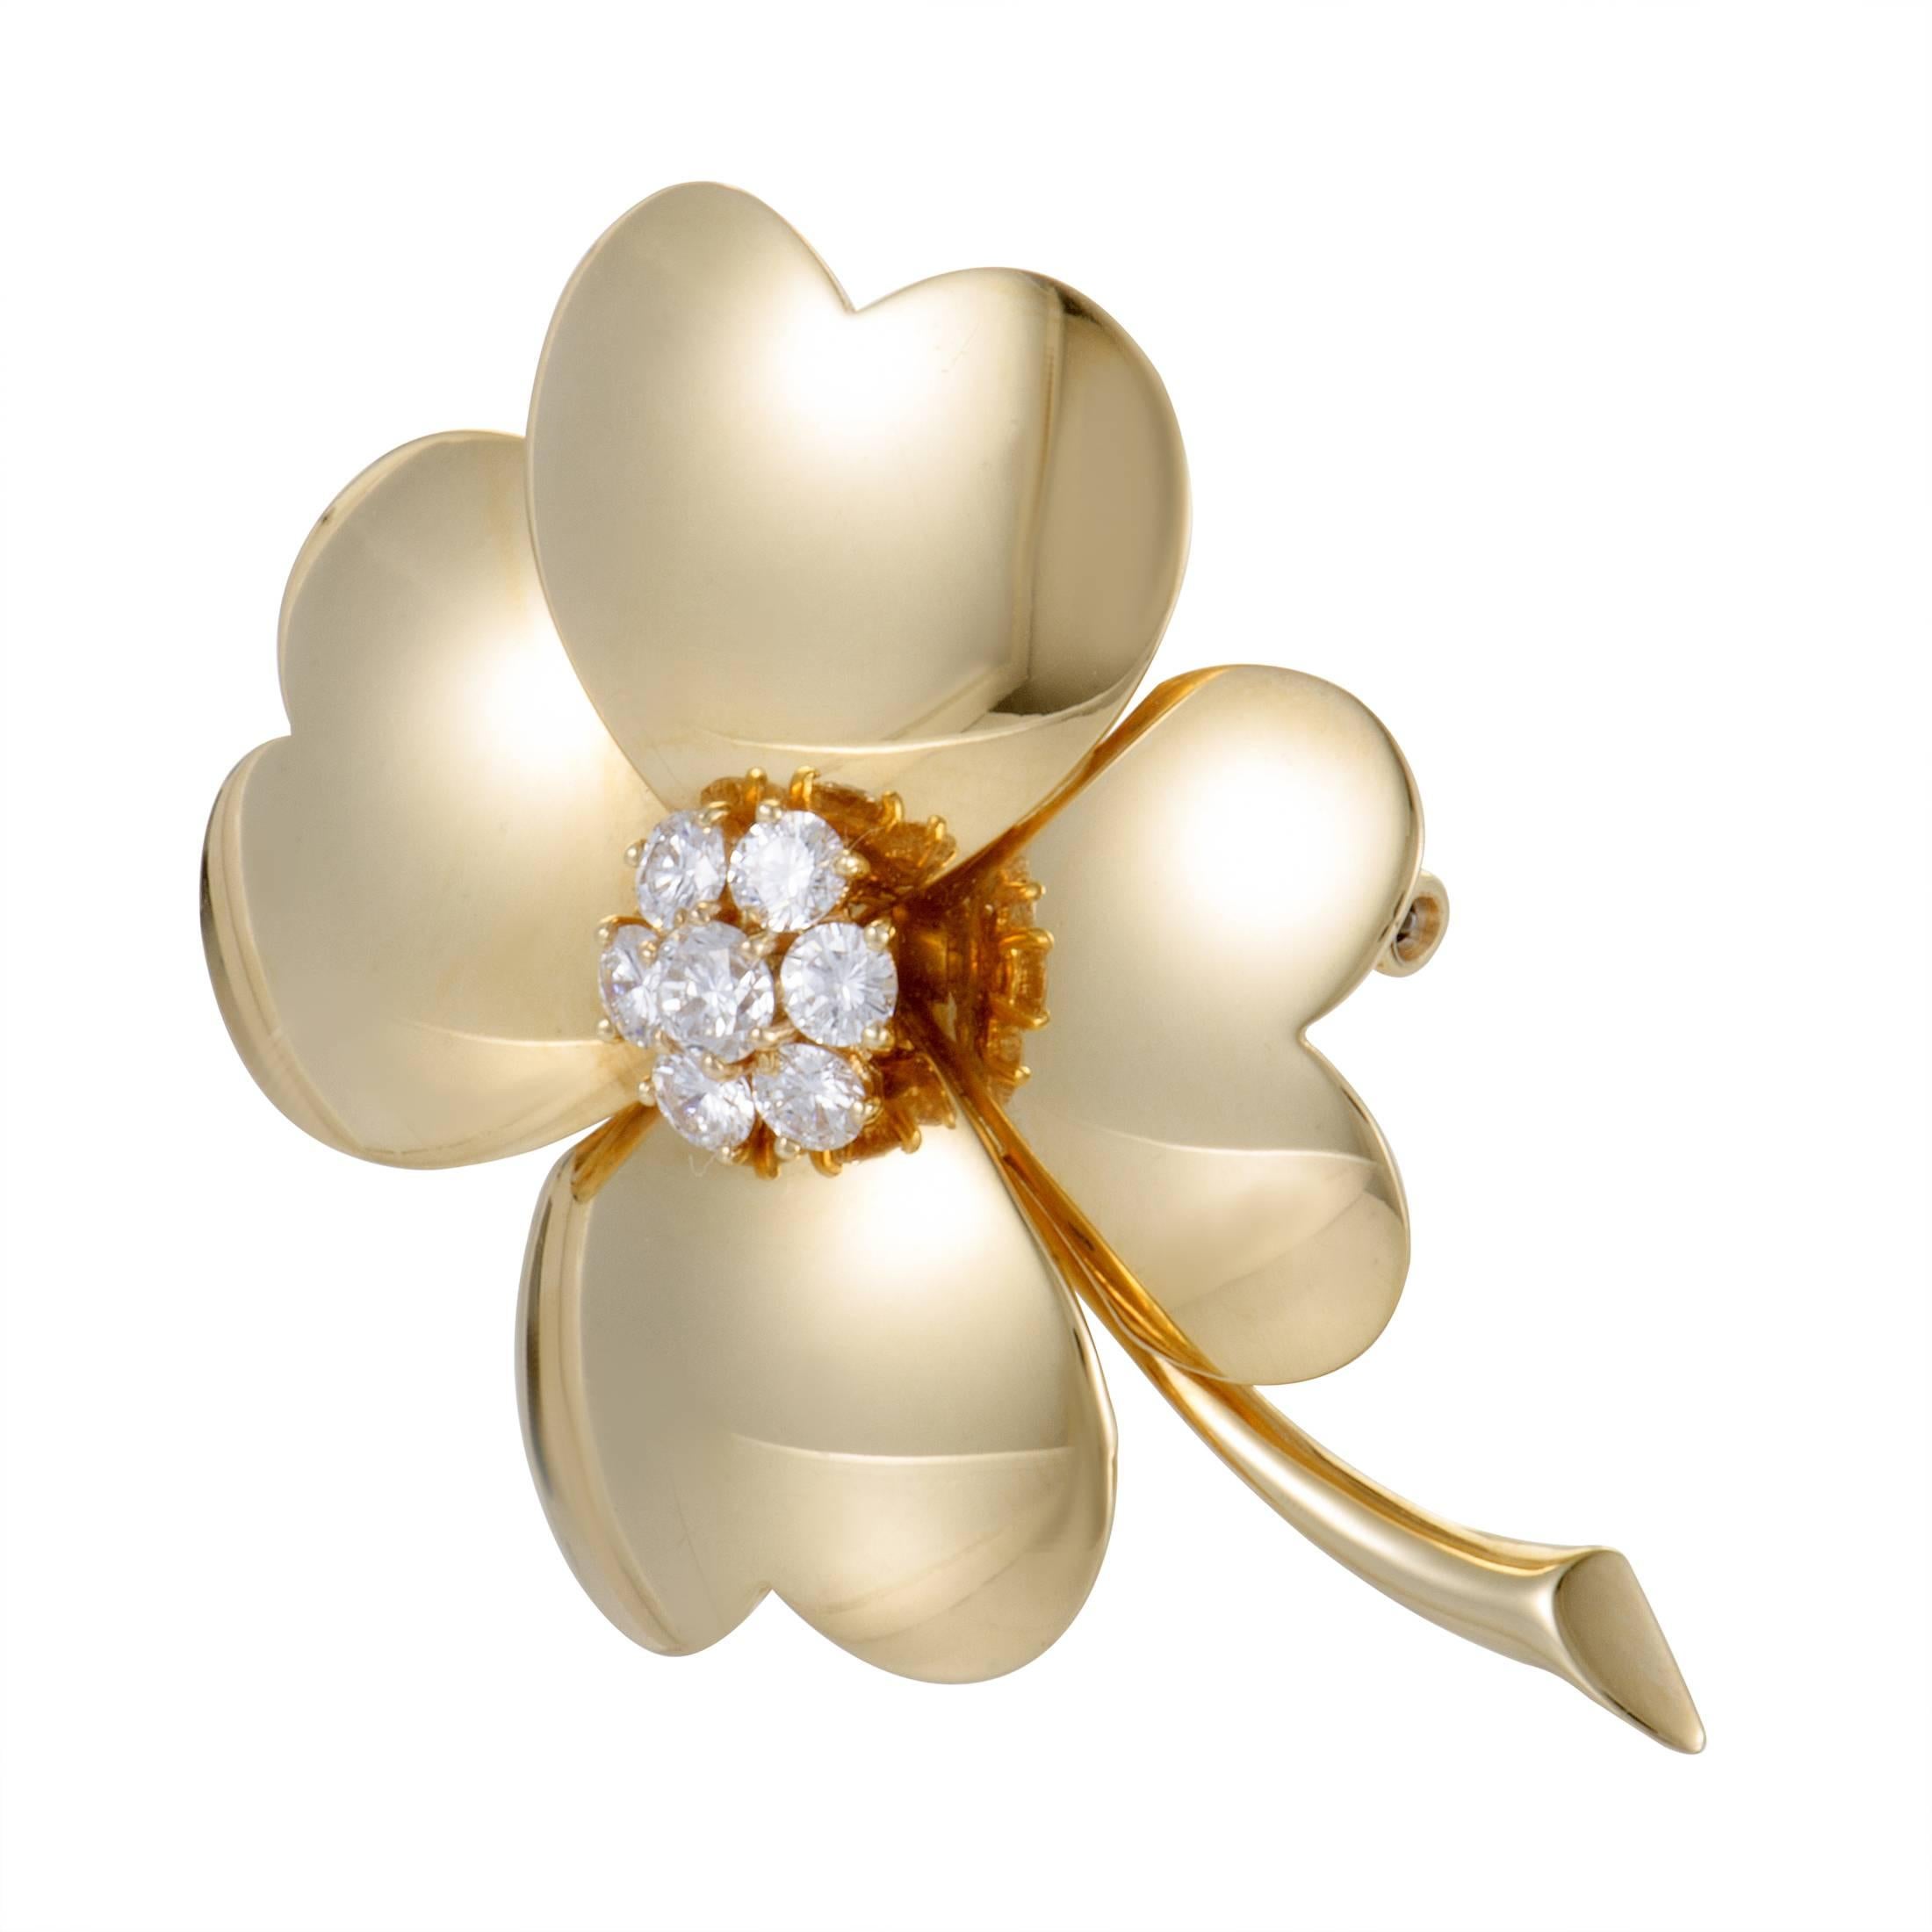 A sublime piece from the ever-enchanting “Cosmos” collection, this exceptional vintage brooch designed by Van Cleef & Arpels exudes charm and elegance. The brooch is made of classy 18K yellow gold and decorated with sparkly diamonds that weigh 1.00